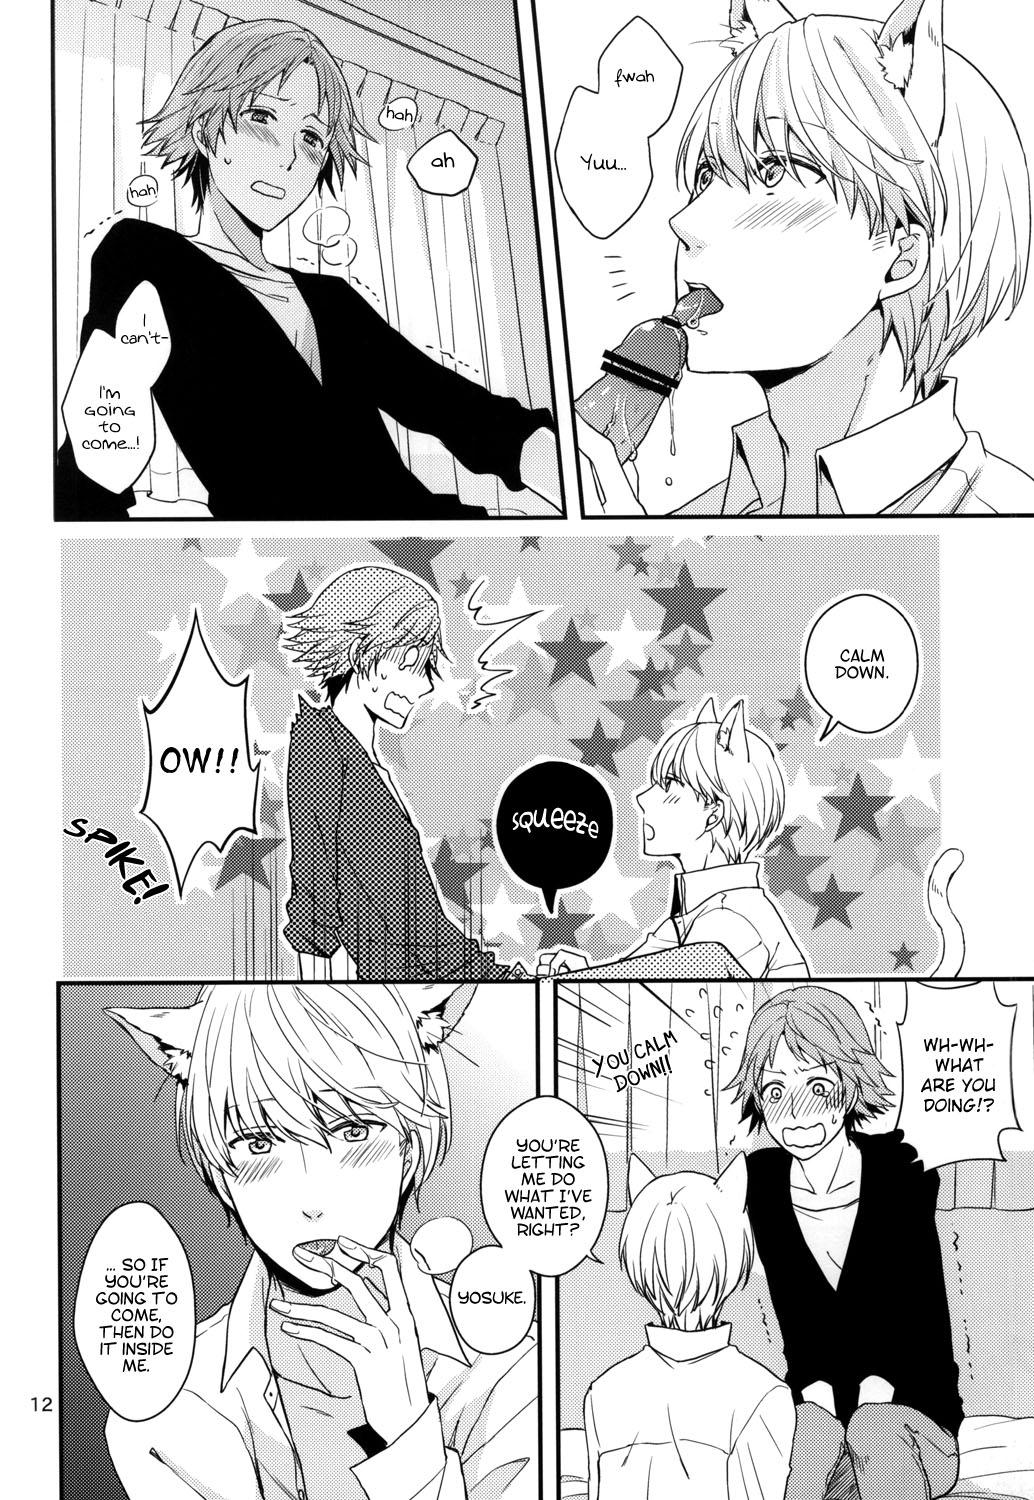 Hot CRAZY CAT LOVER - Persona 4 Assfingering - Page 11